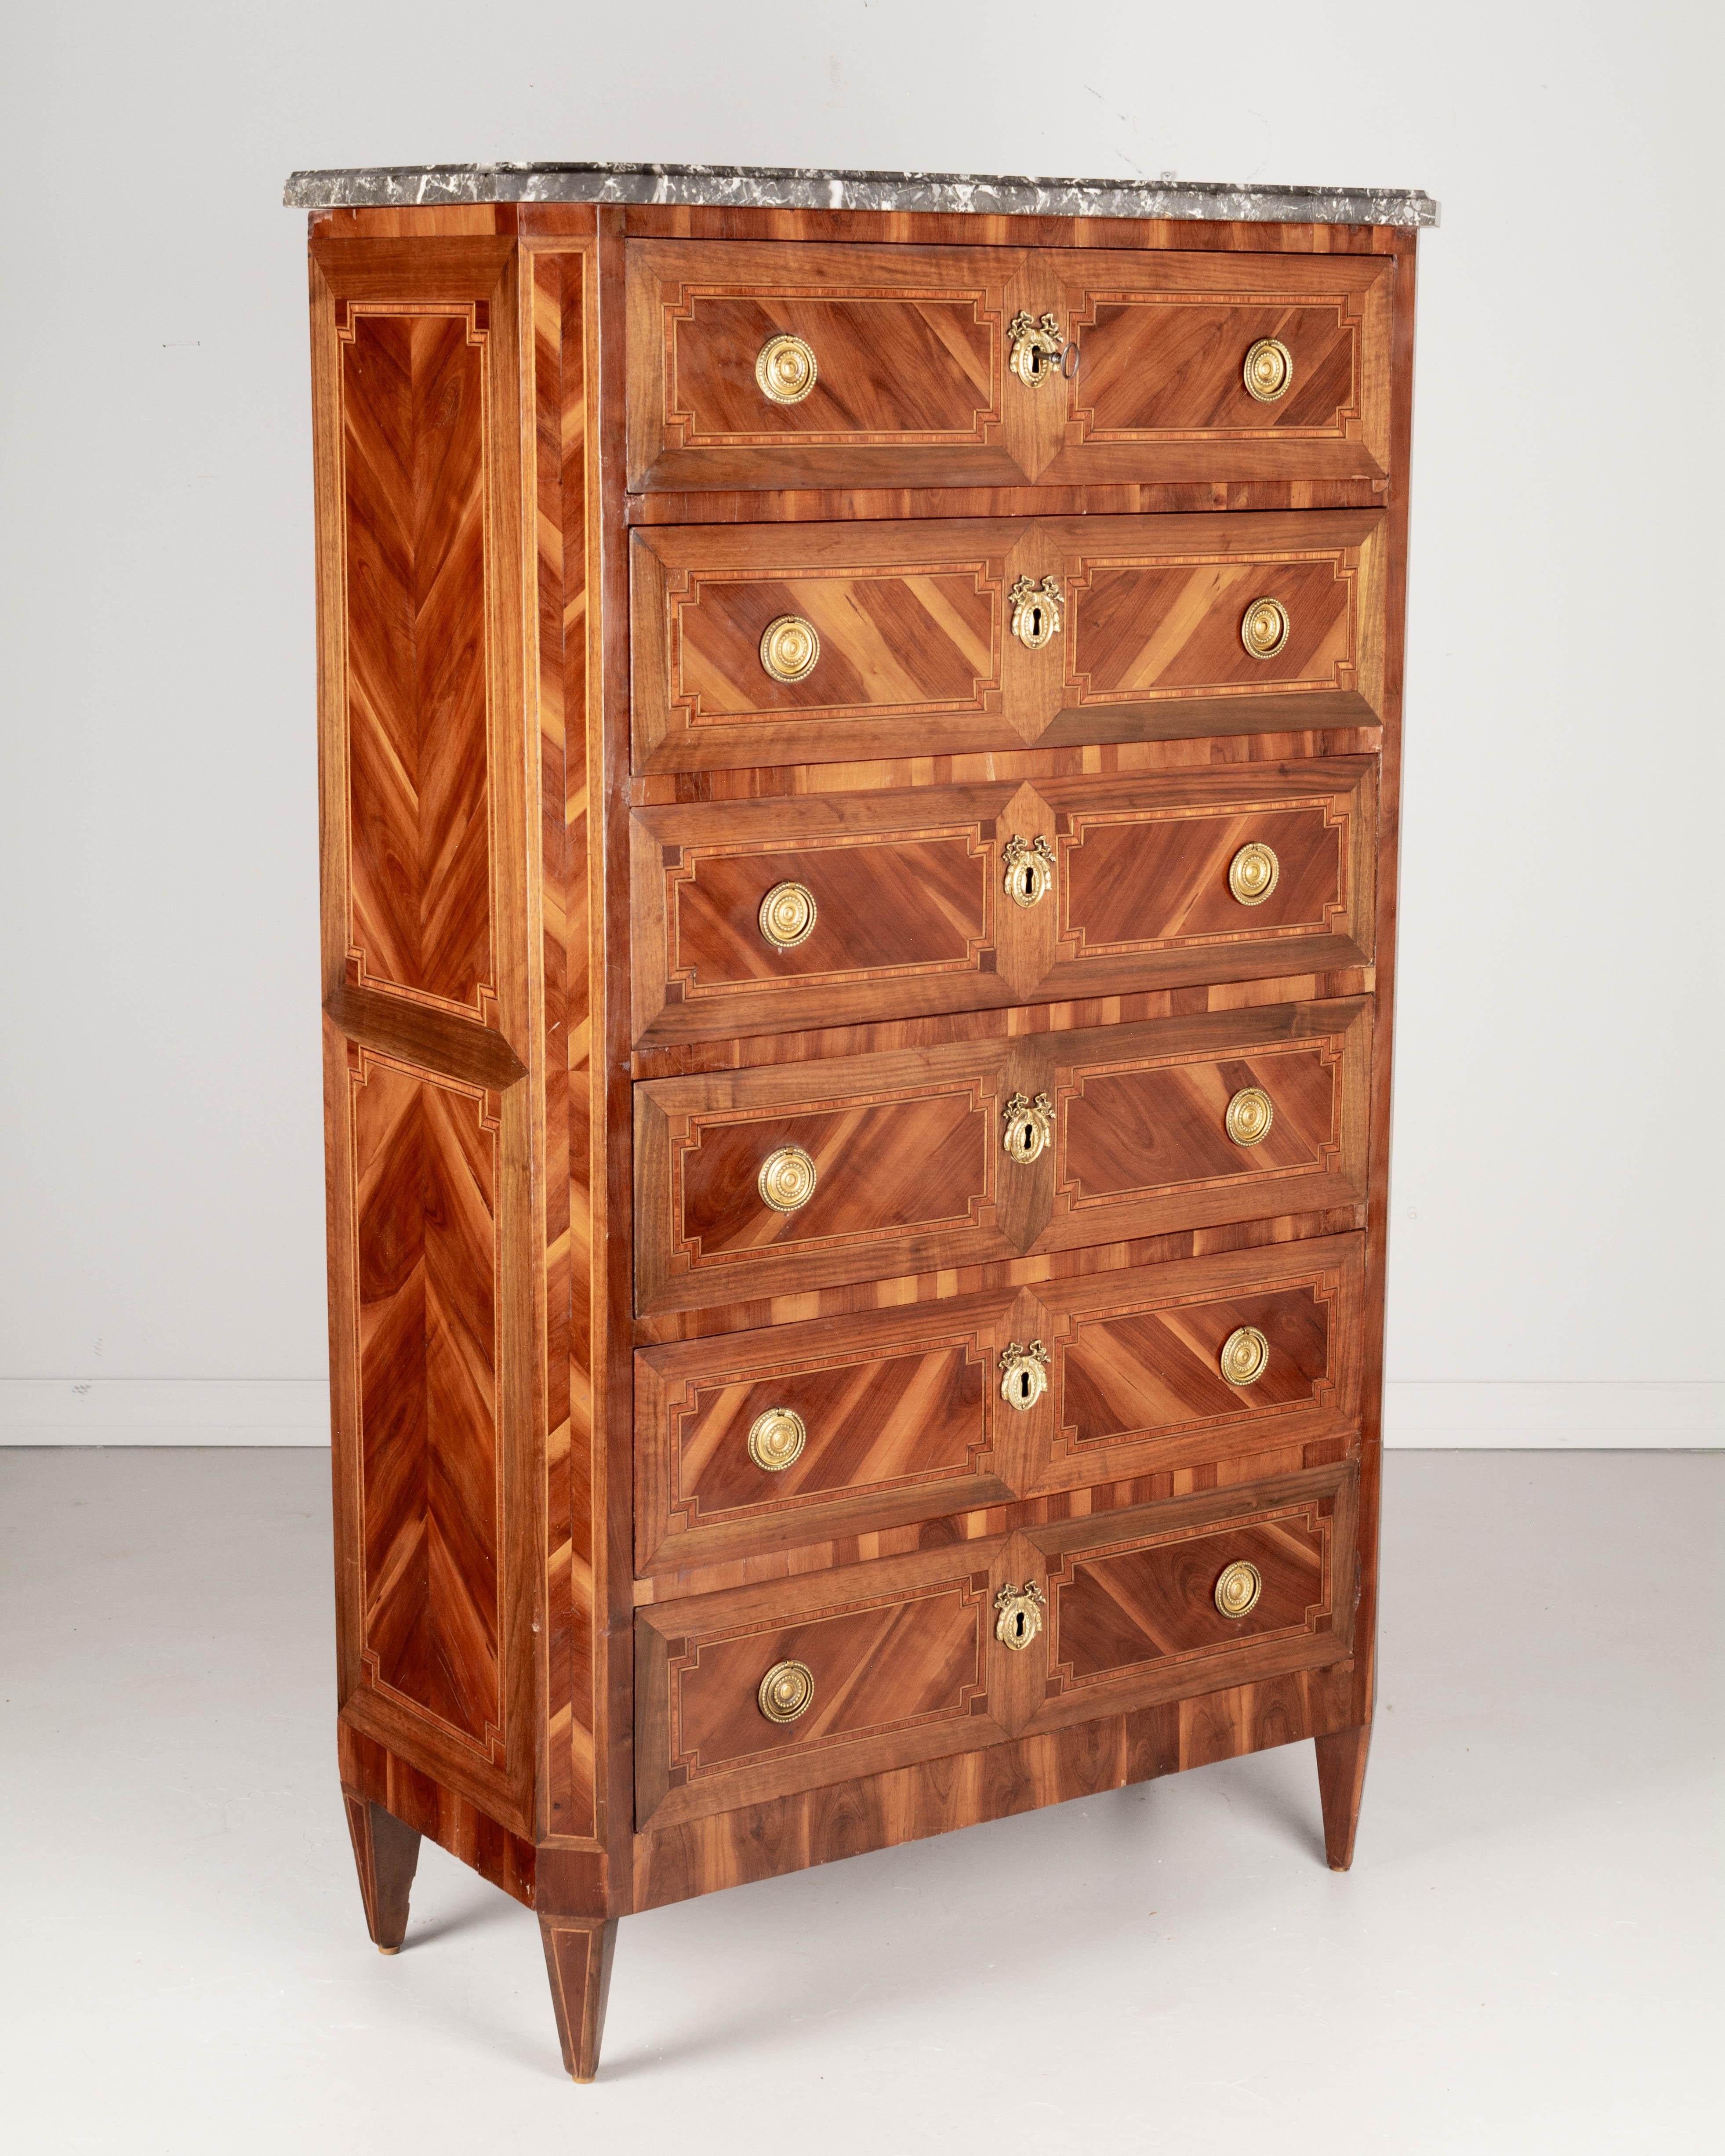 A fine early 19th century Louis XV style French marquetry chiffonier, or tall gentleman's chest. Expertly crafted with inlaid veneers of walnut and mahogany and various exotic woods. Oak as a secondary wood. Finish retains a nice luster. Six